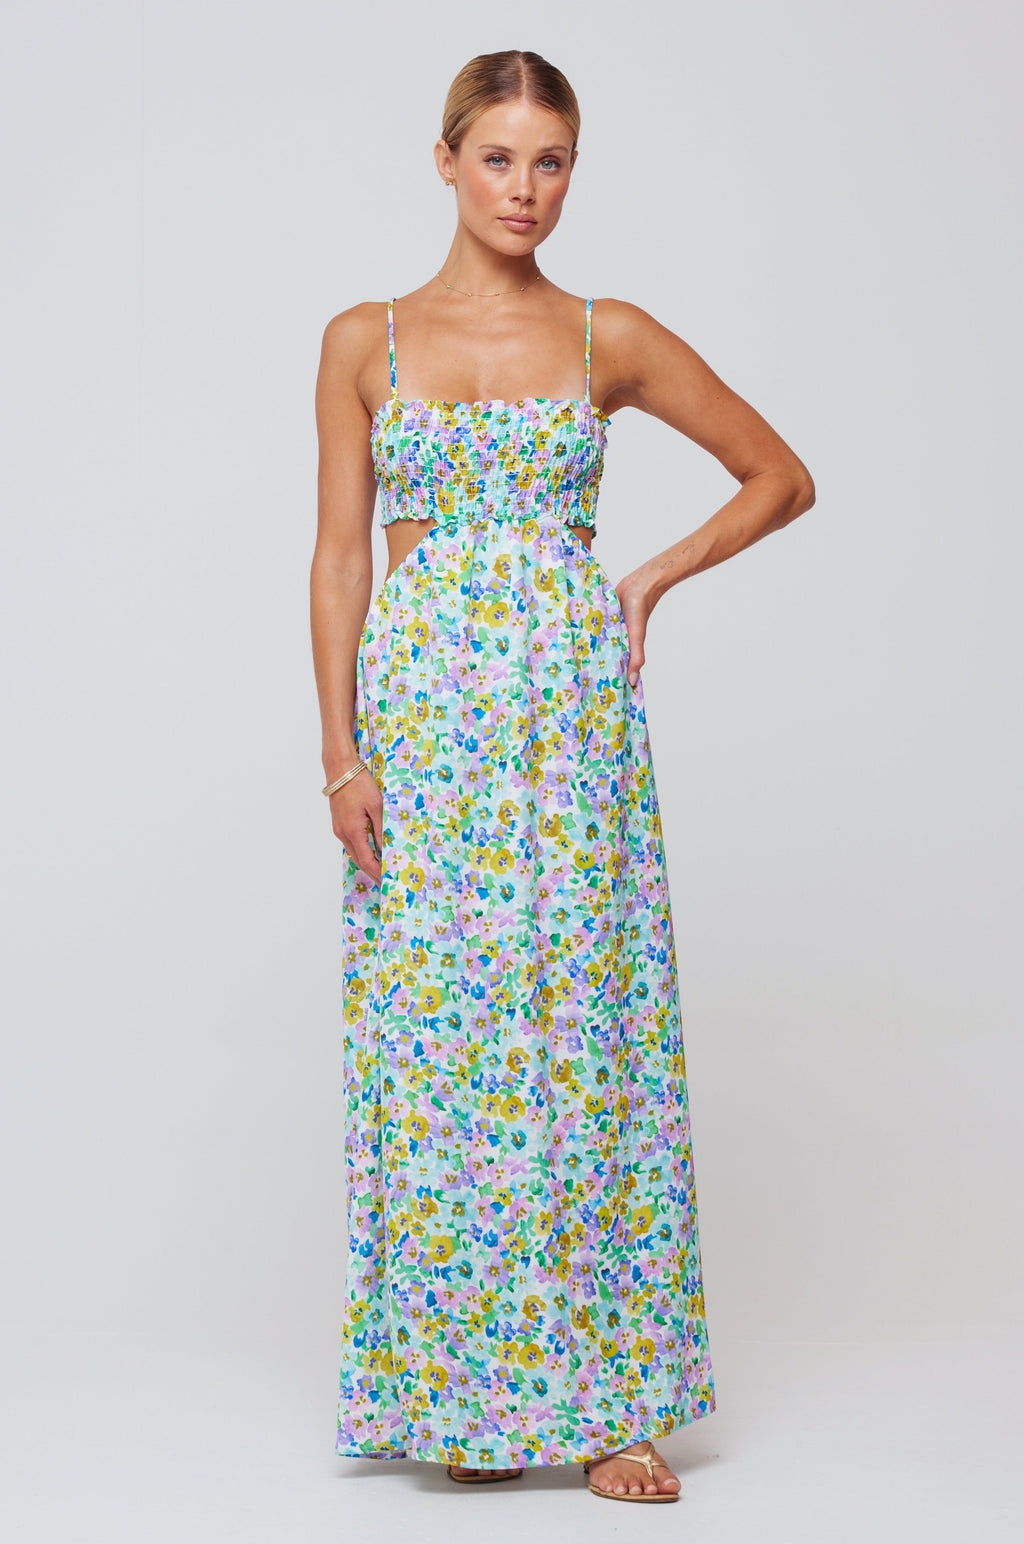 This is an image of Jordan Maxi in Monet - RESA featuring a model wearing the dress